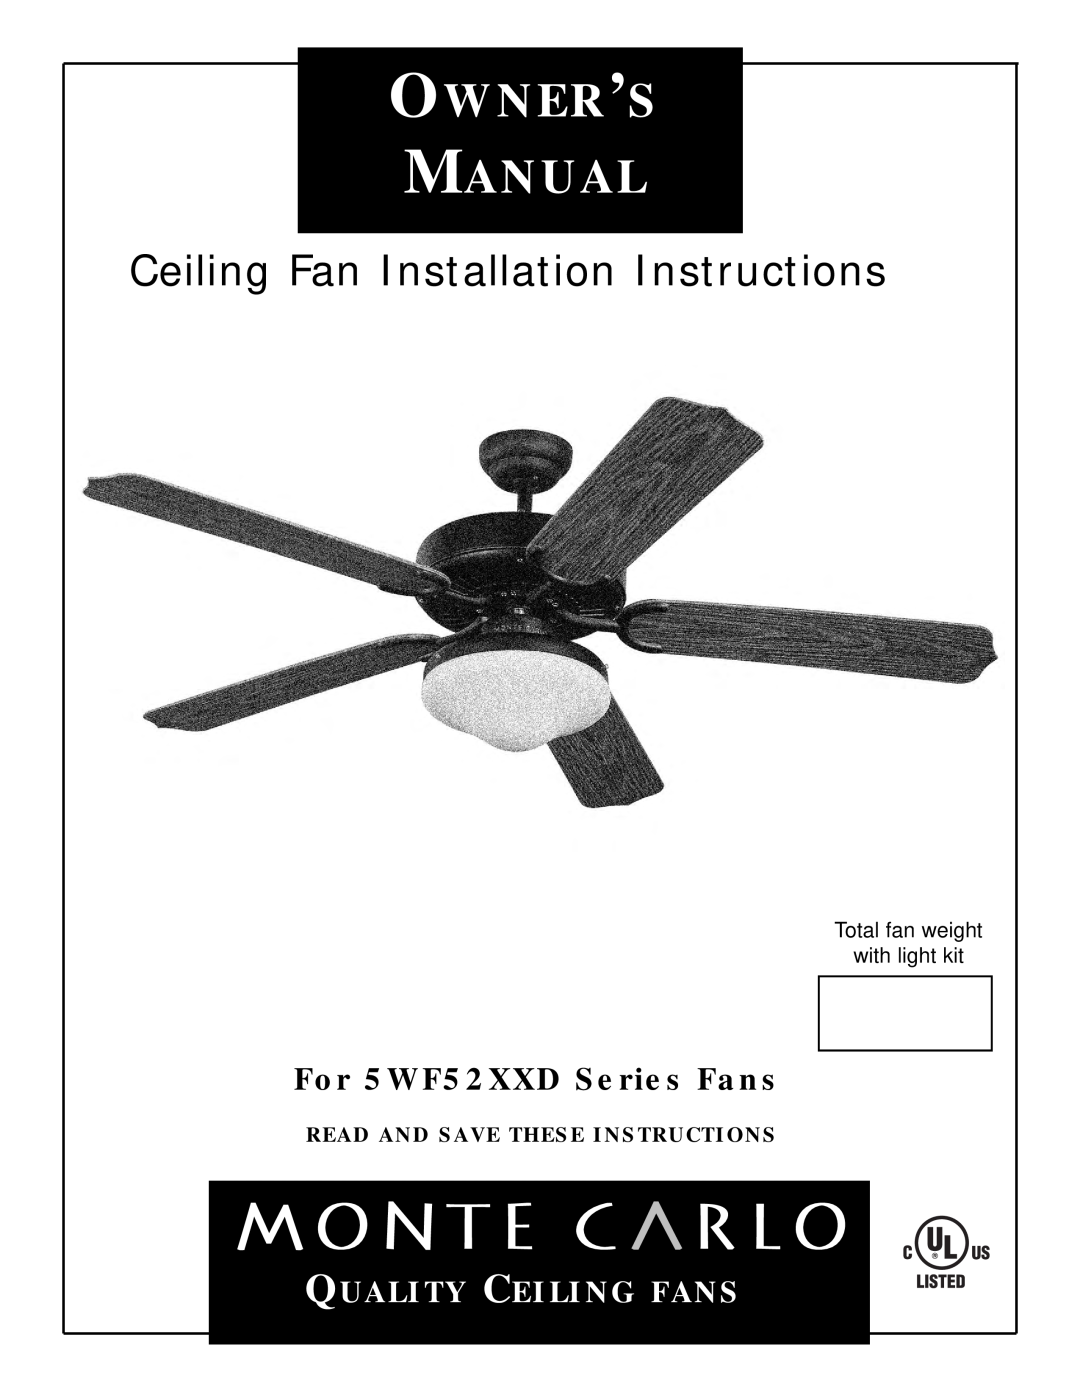 Monte Carlo Fan Company installation instructions Read And Save These Instructions, For 5WF52XXD Series Fans 